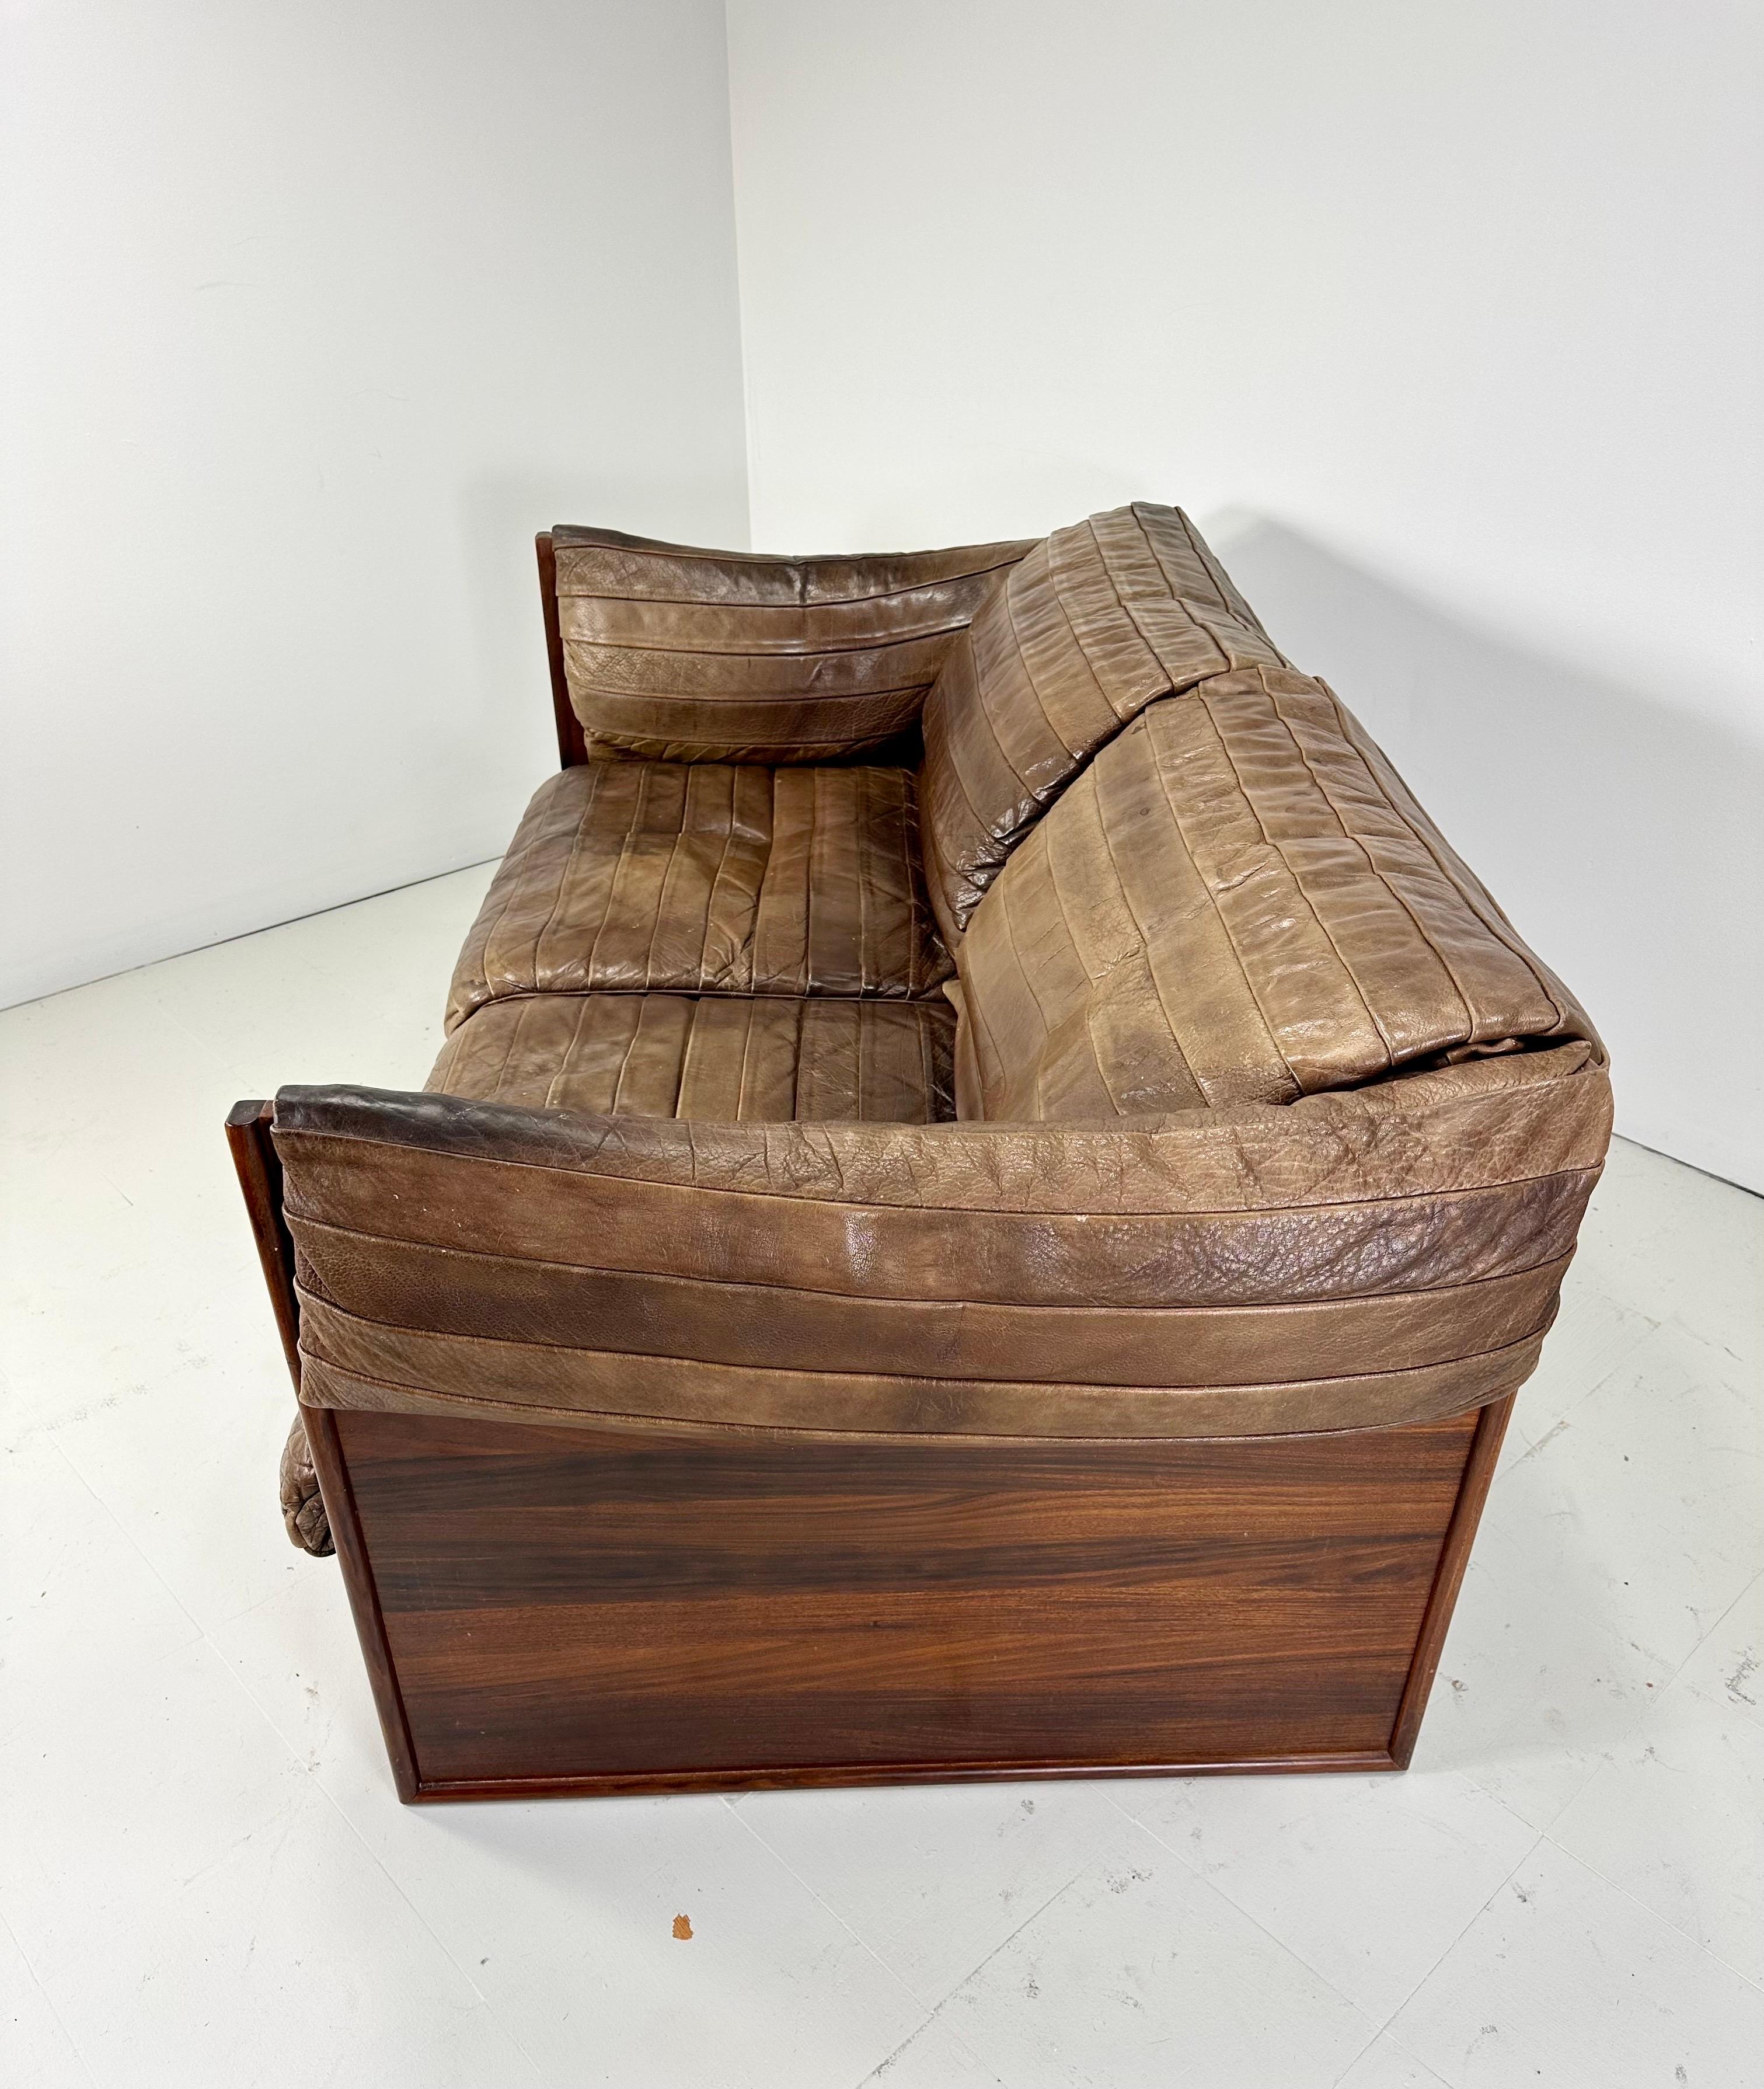 Skipper Mobler Rosewood Box settee. with high quality Buffalo leather. Unique cushion designs creates a wonderful design and excellent comfort. Denmark, 1960’s  Full length sofa also available.

Delivery to NYC area for $500